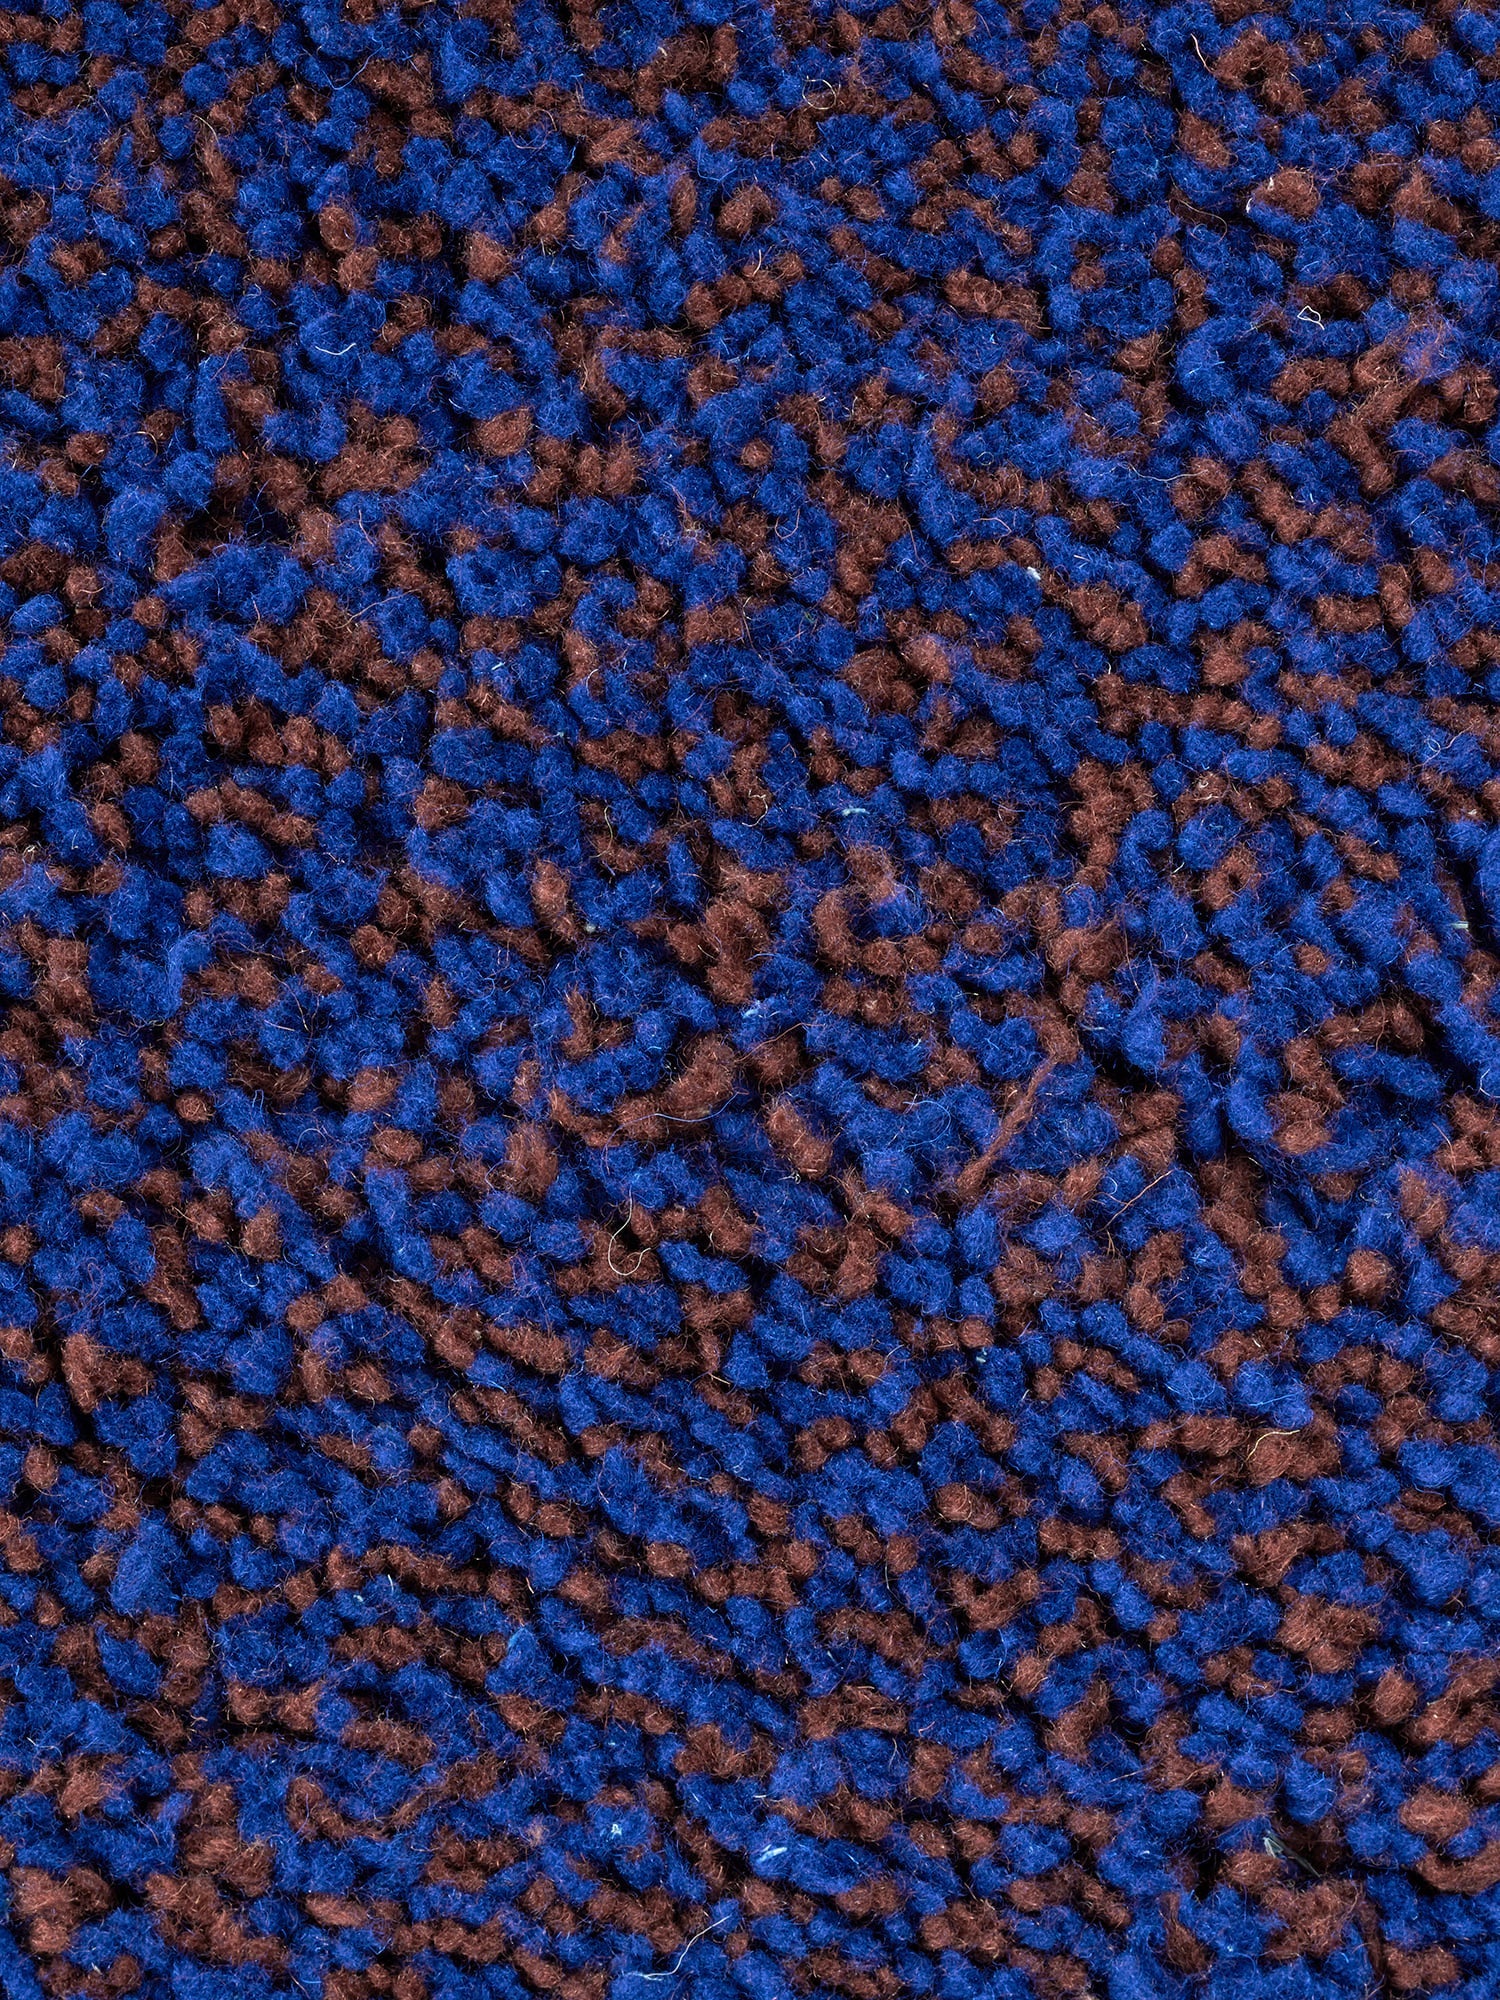 Noise - Blue and Dark Brown